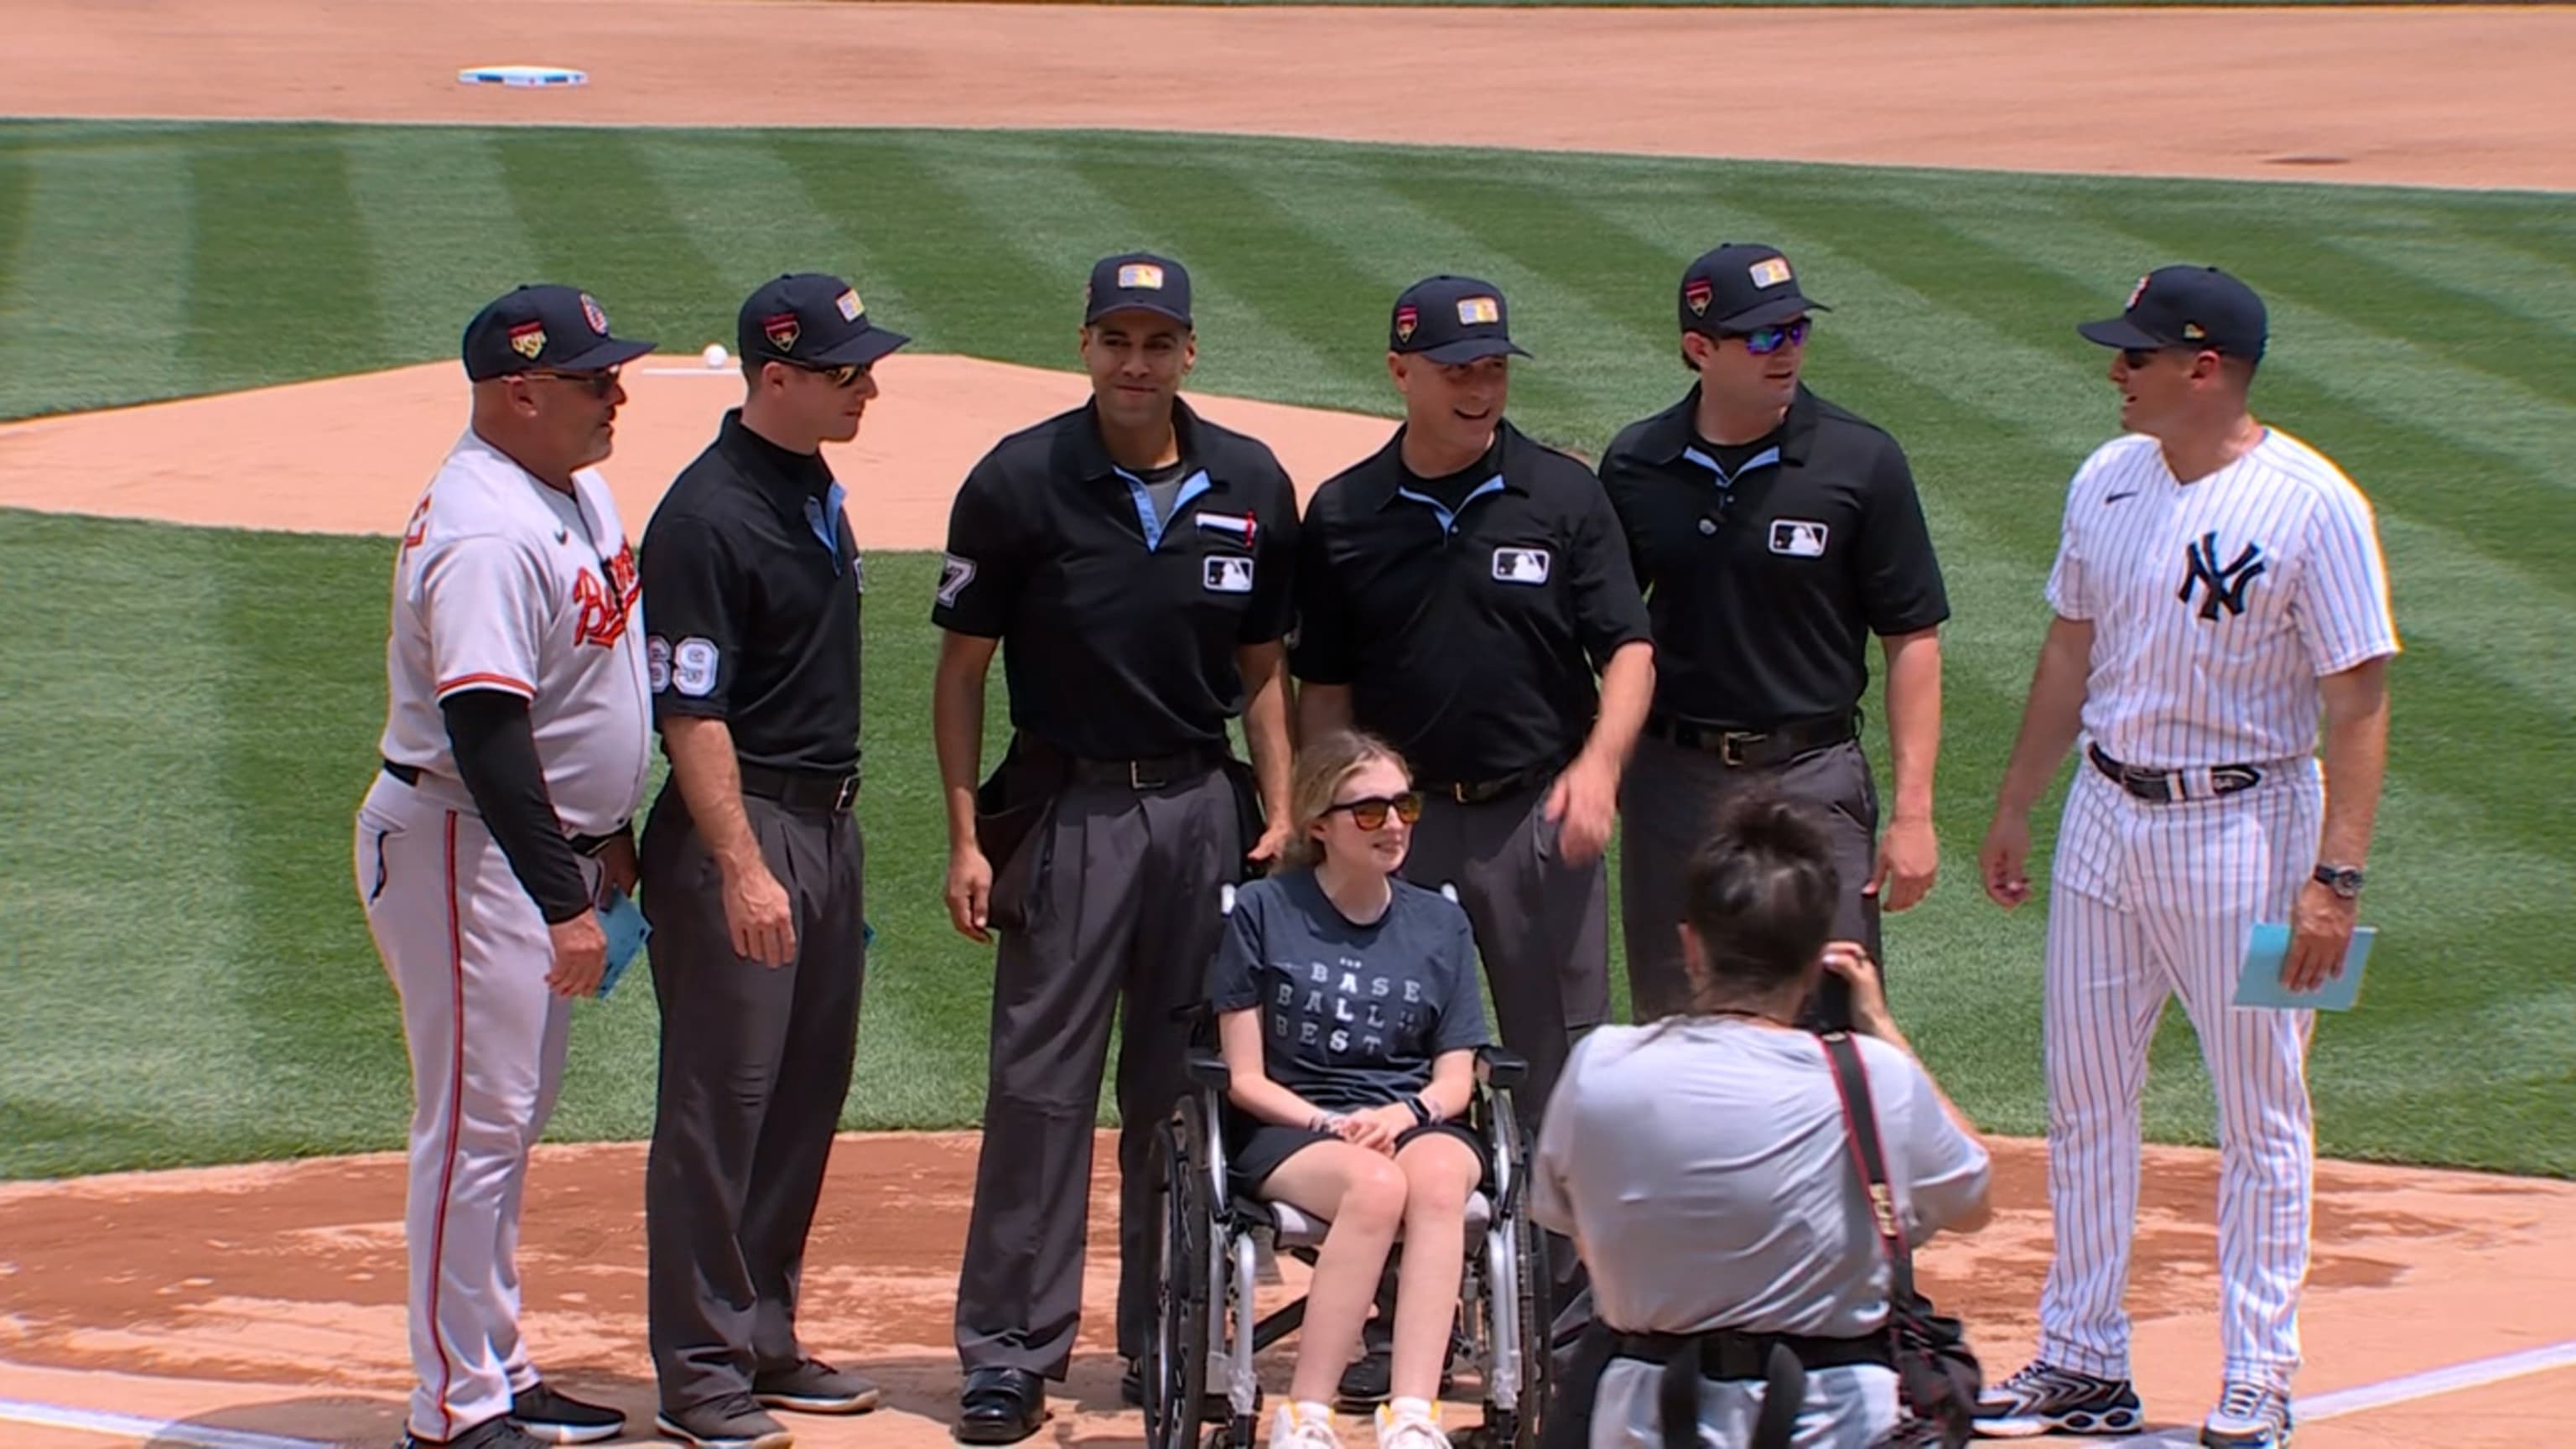 NYSportsJournalism.com - MLB Unveils Lou Gehrig Day Activation, ALS Support  - On Lou Gehrig Day, MLB, Teams, Players, Fans, ALS Groups Honor His Life,  Legacy